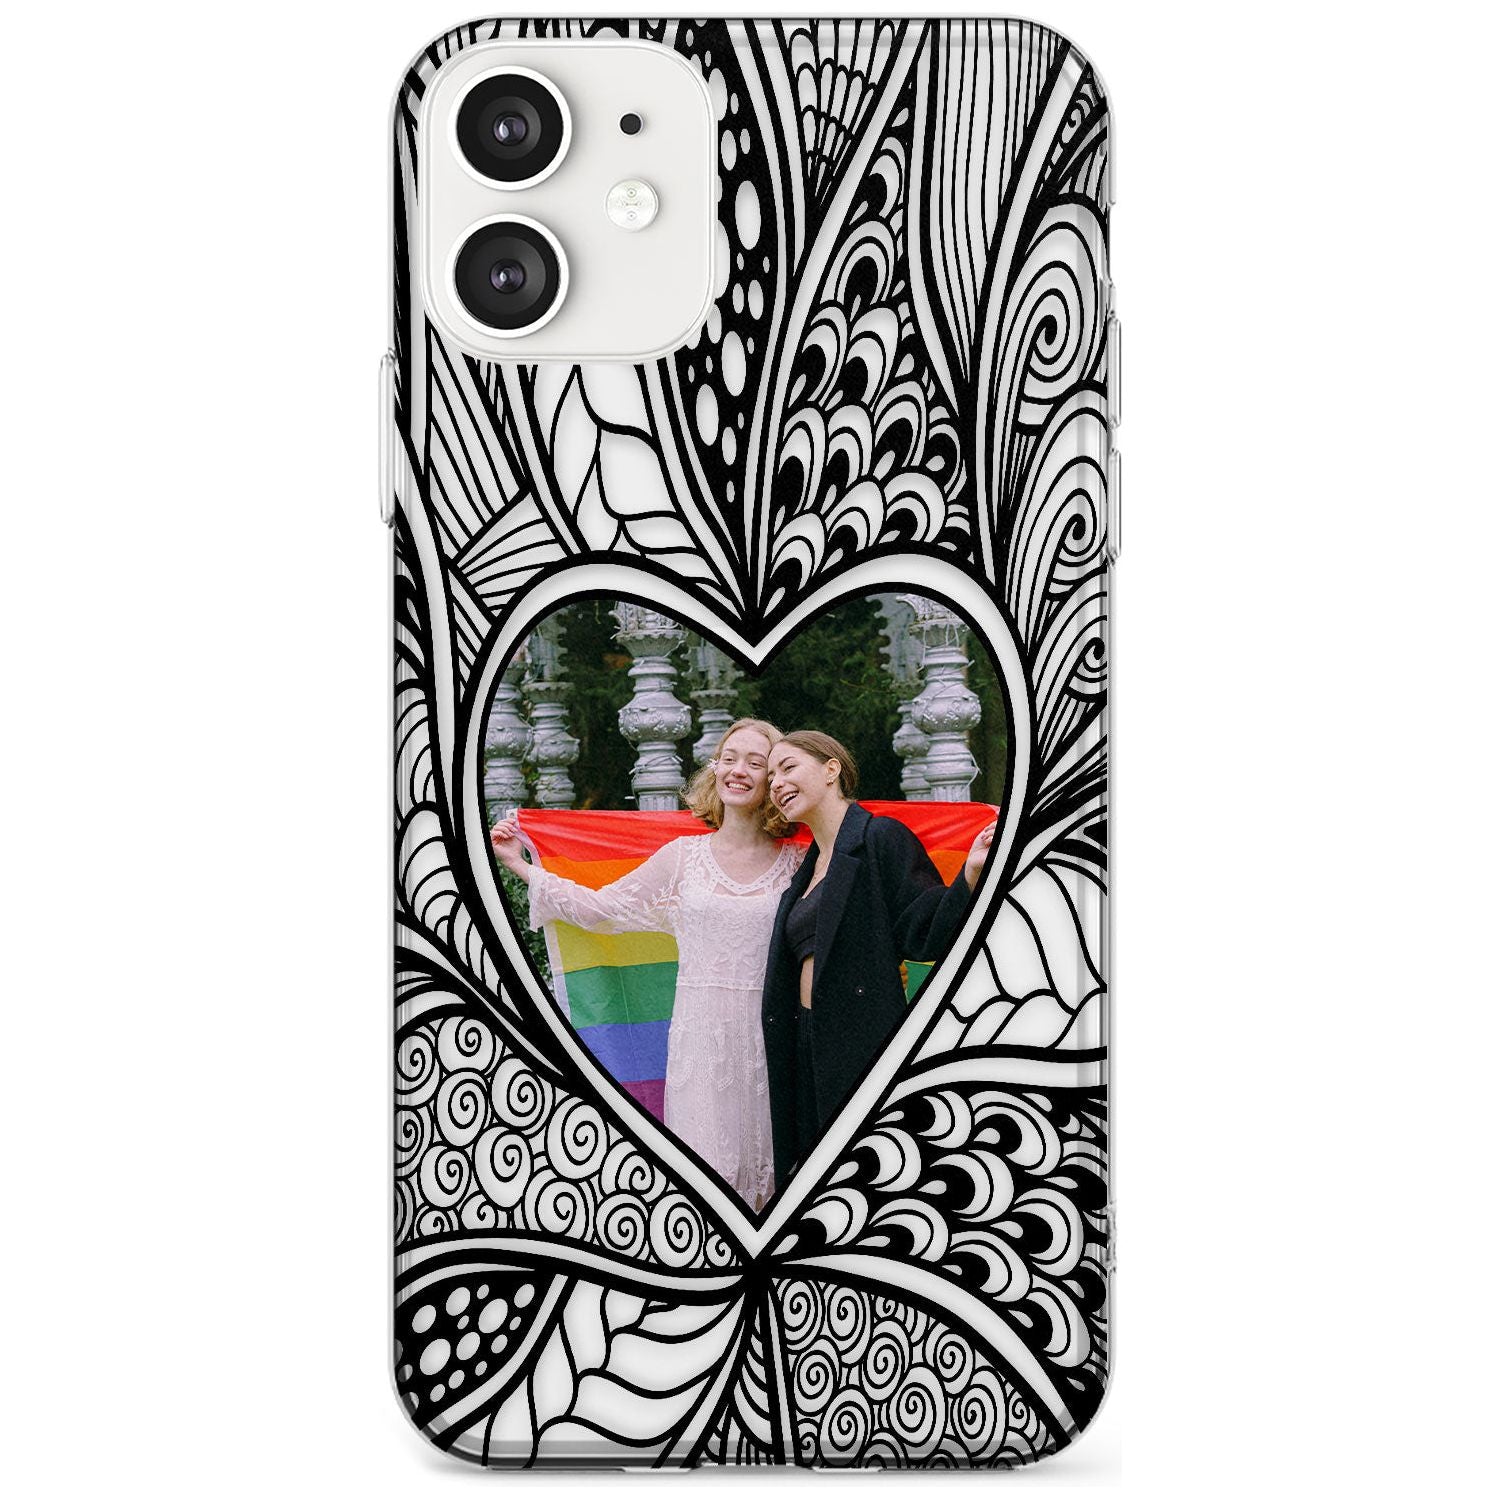 Personalised Henna Heart Photo Case Slim TPU Phone Case for iPhone 11